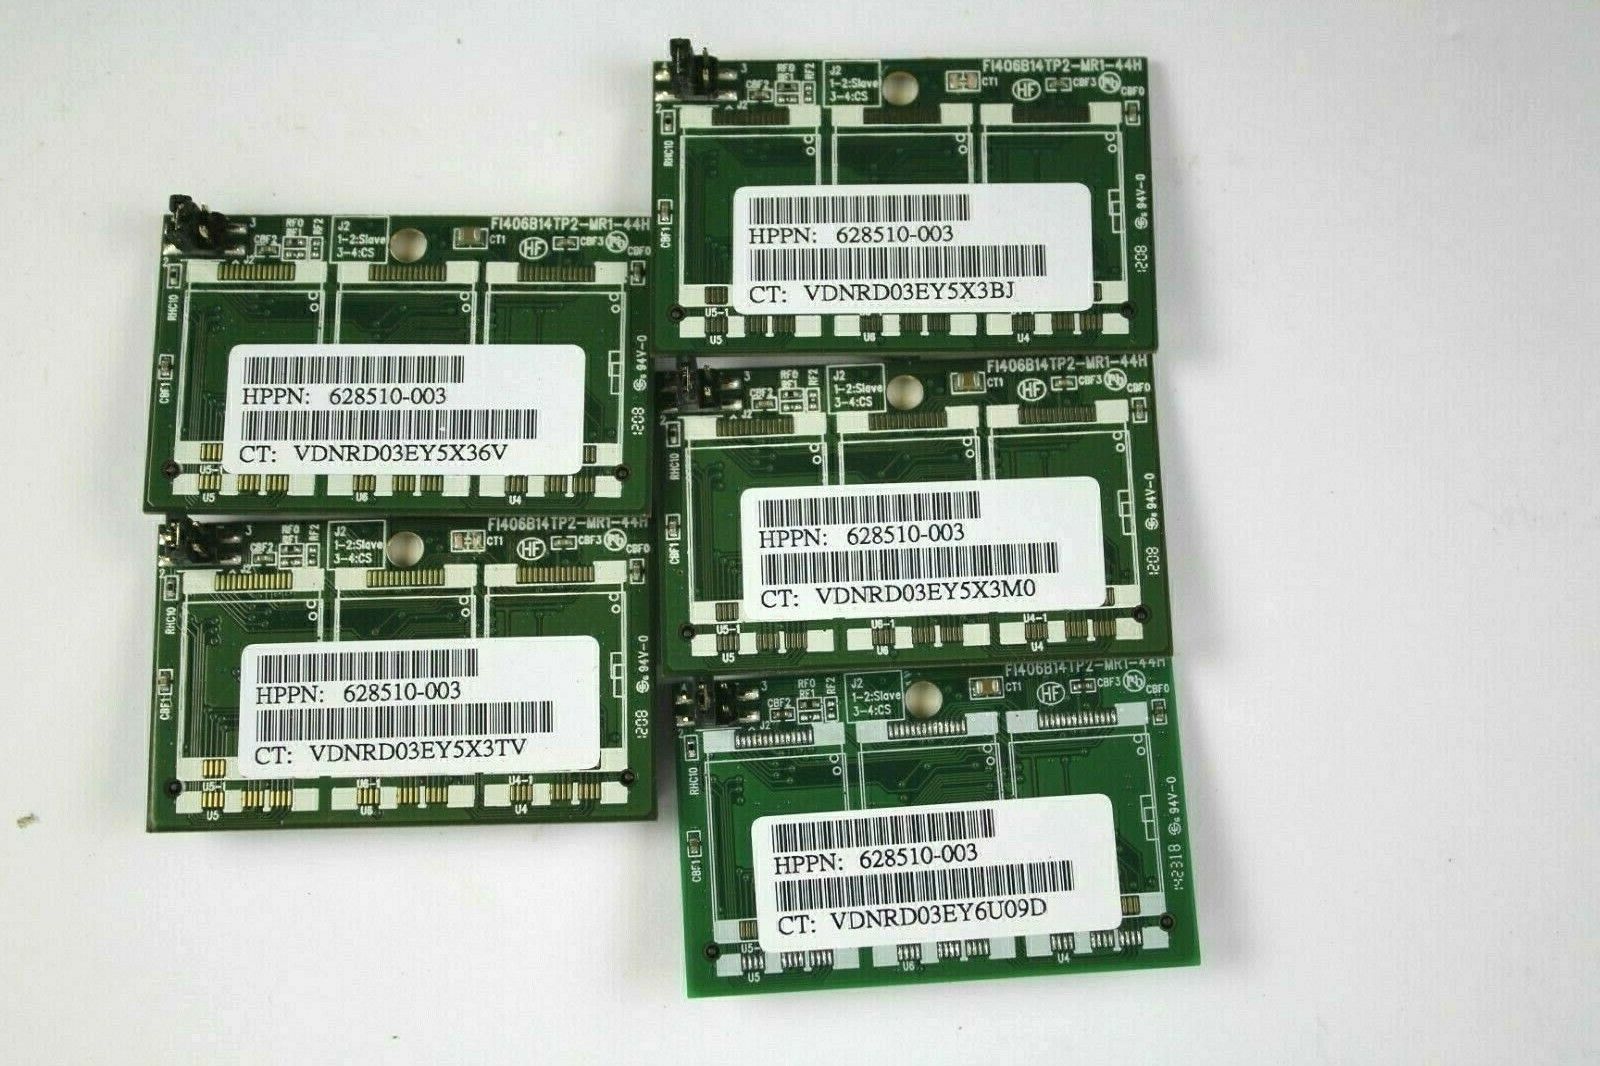 Phison 1GB 44-Pin IDE ThinClient Flash Memory Modules HP 628510-003 (Lots of 5)